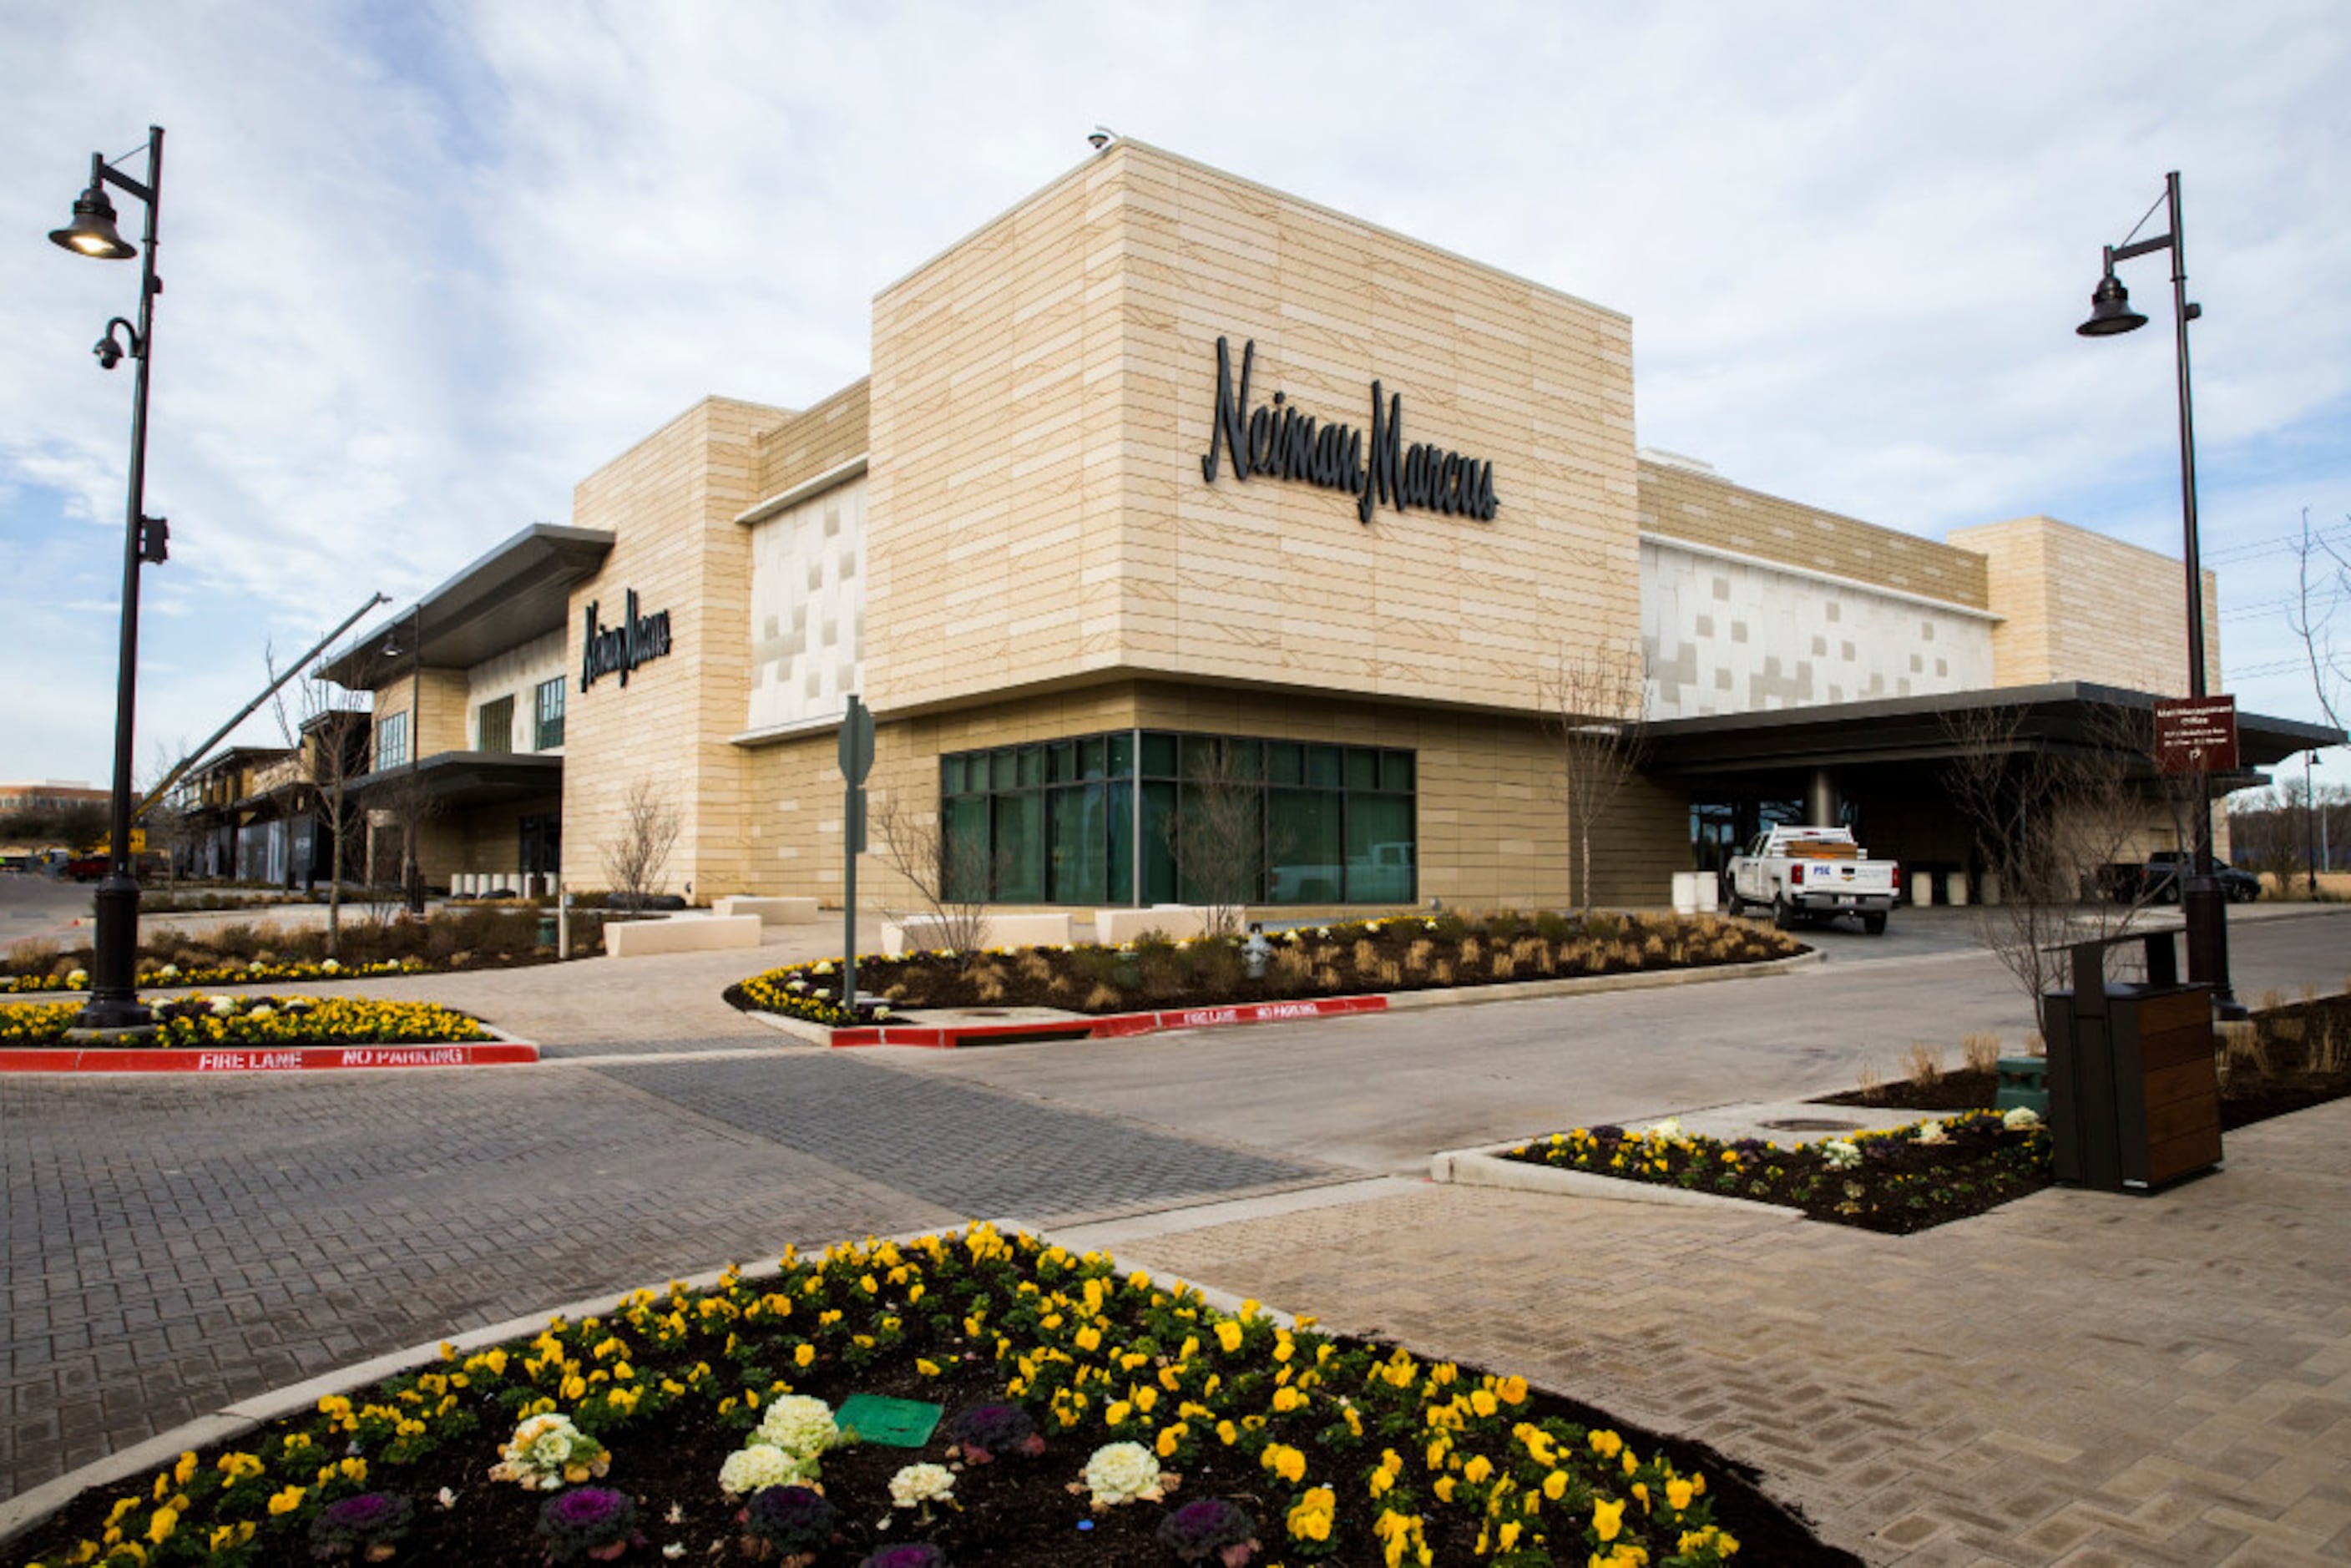 Dallas Offers Millions to Neiman Marcus To Keep Century-Old Brand in City